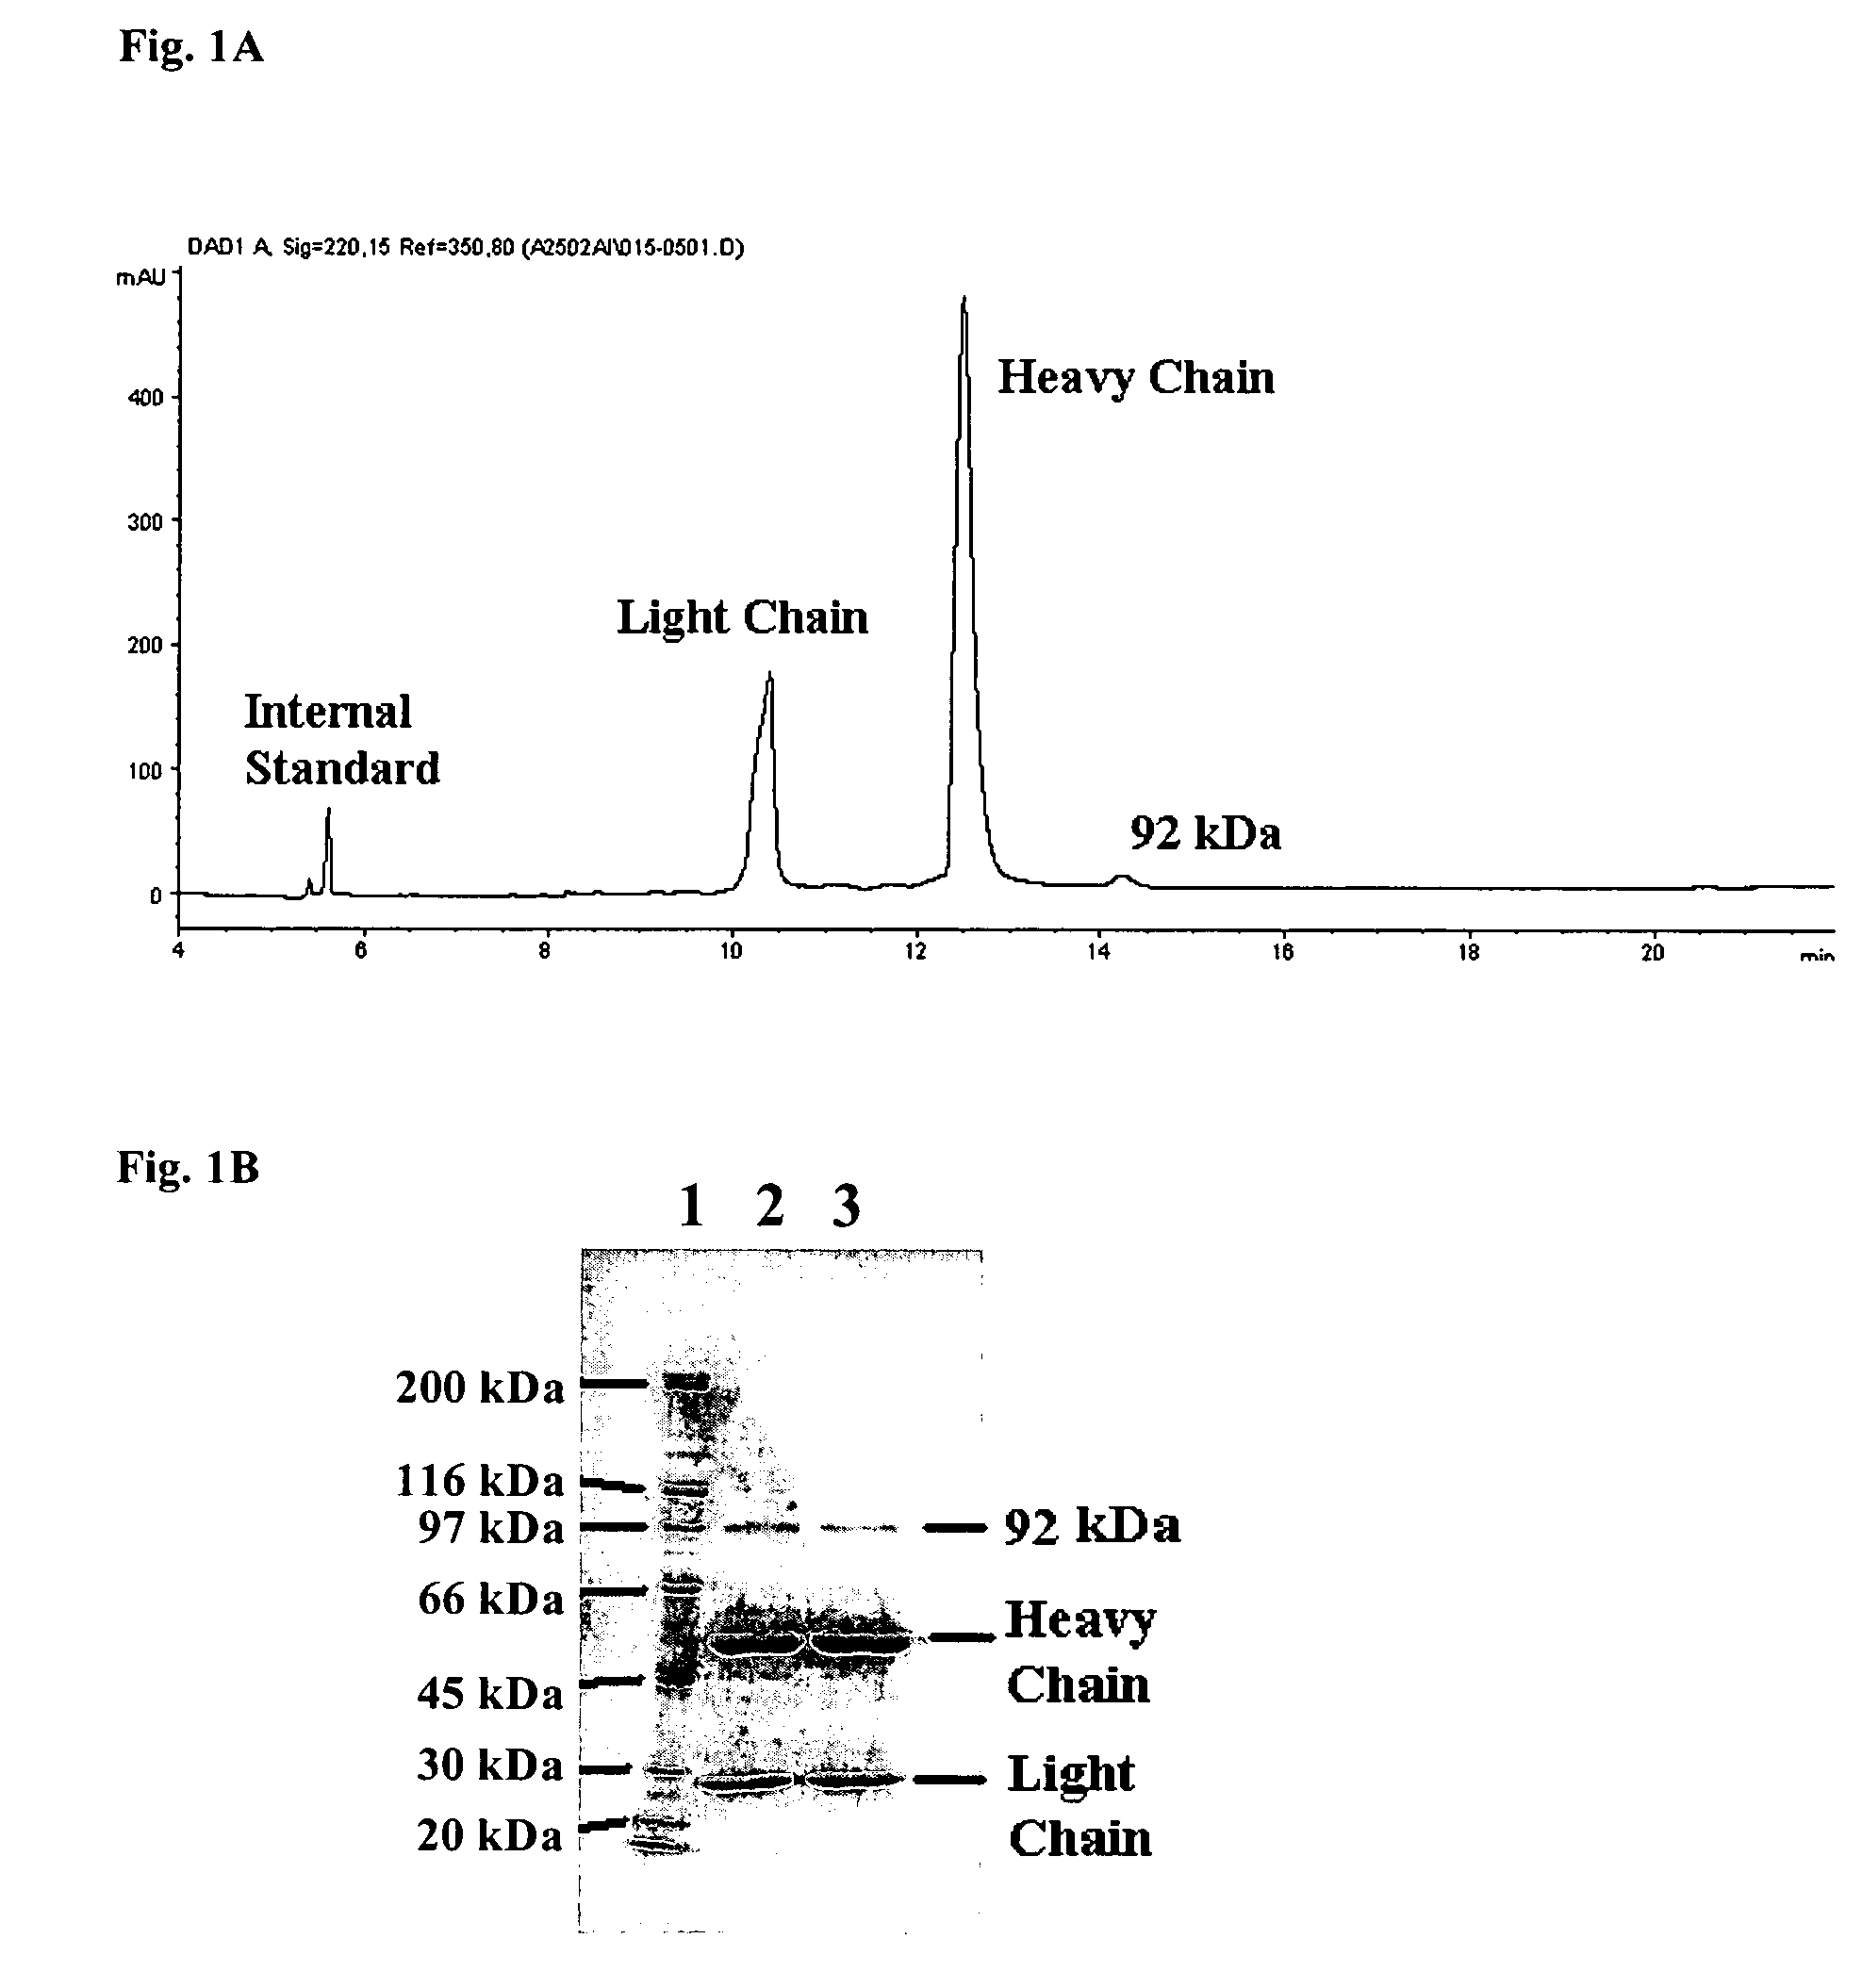 Macromolecules comprising a thioether cross-link